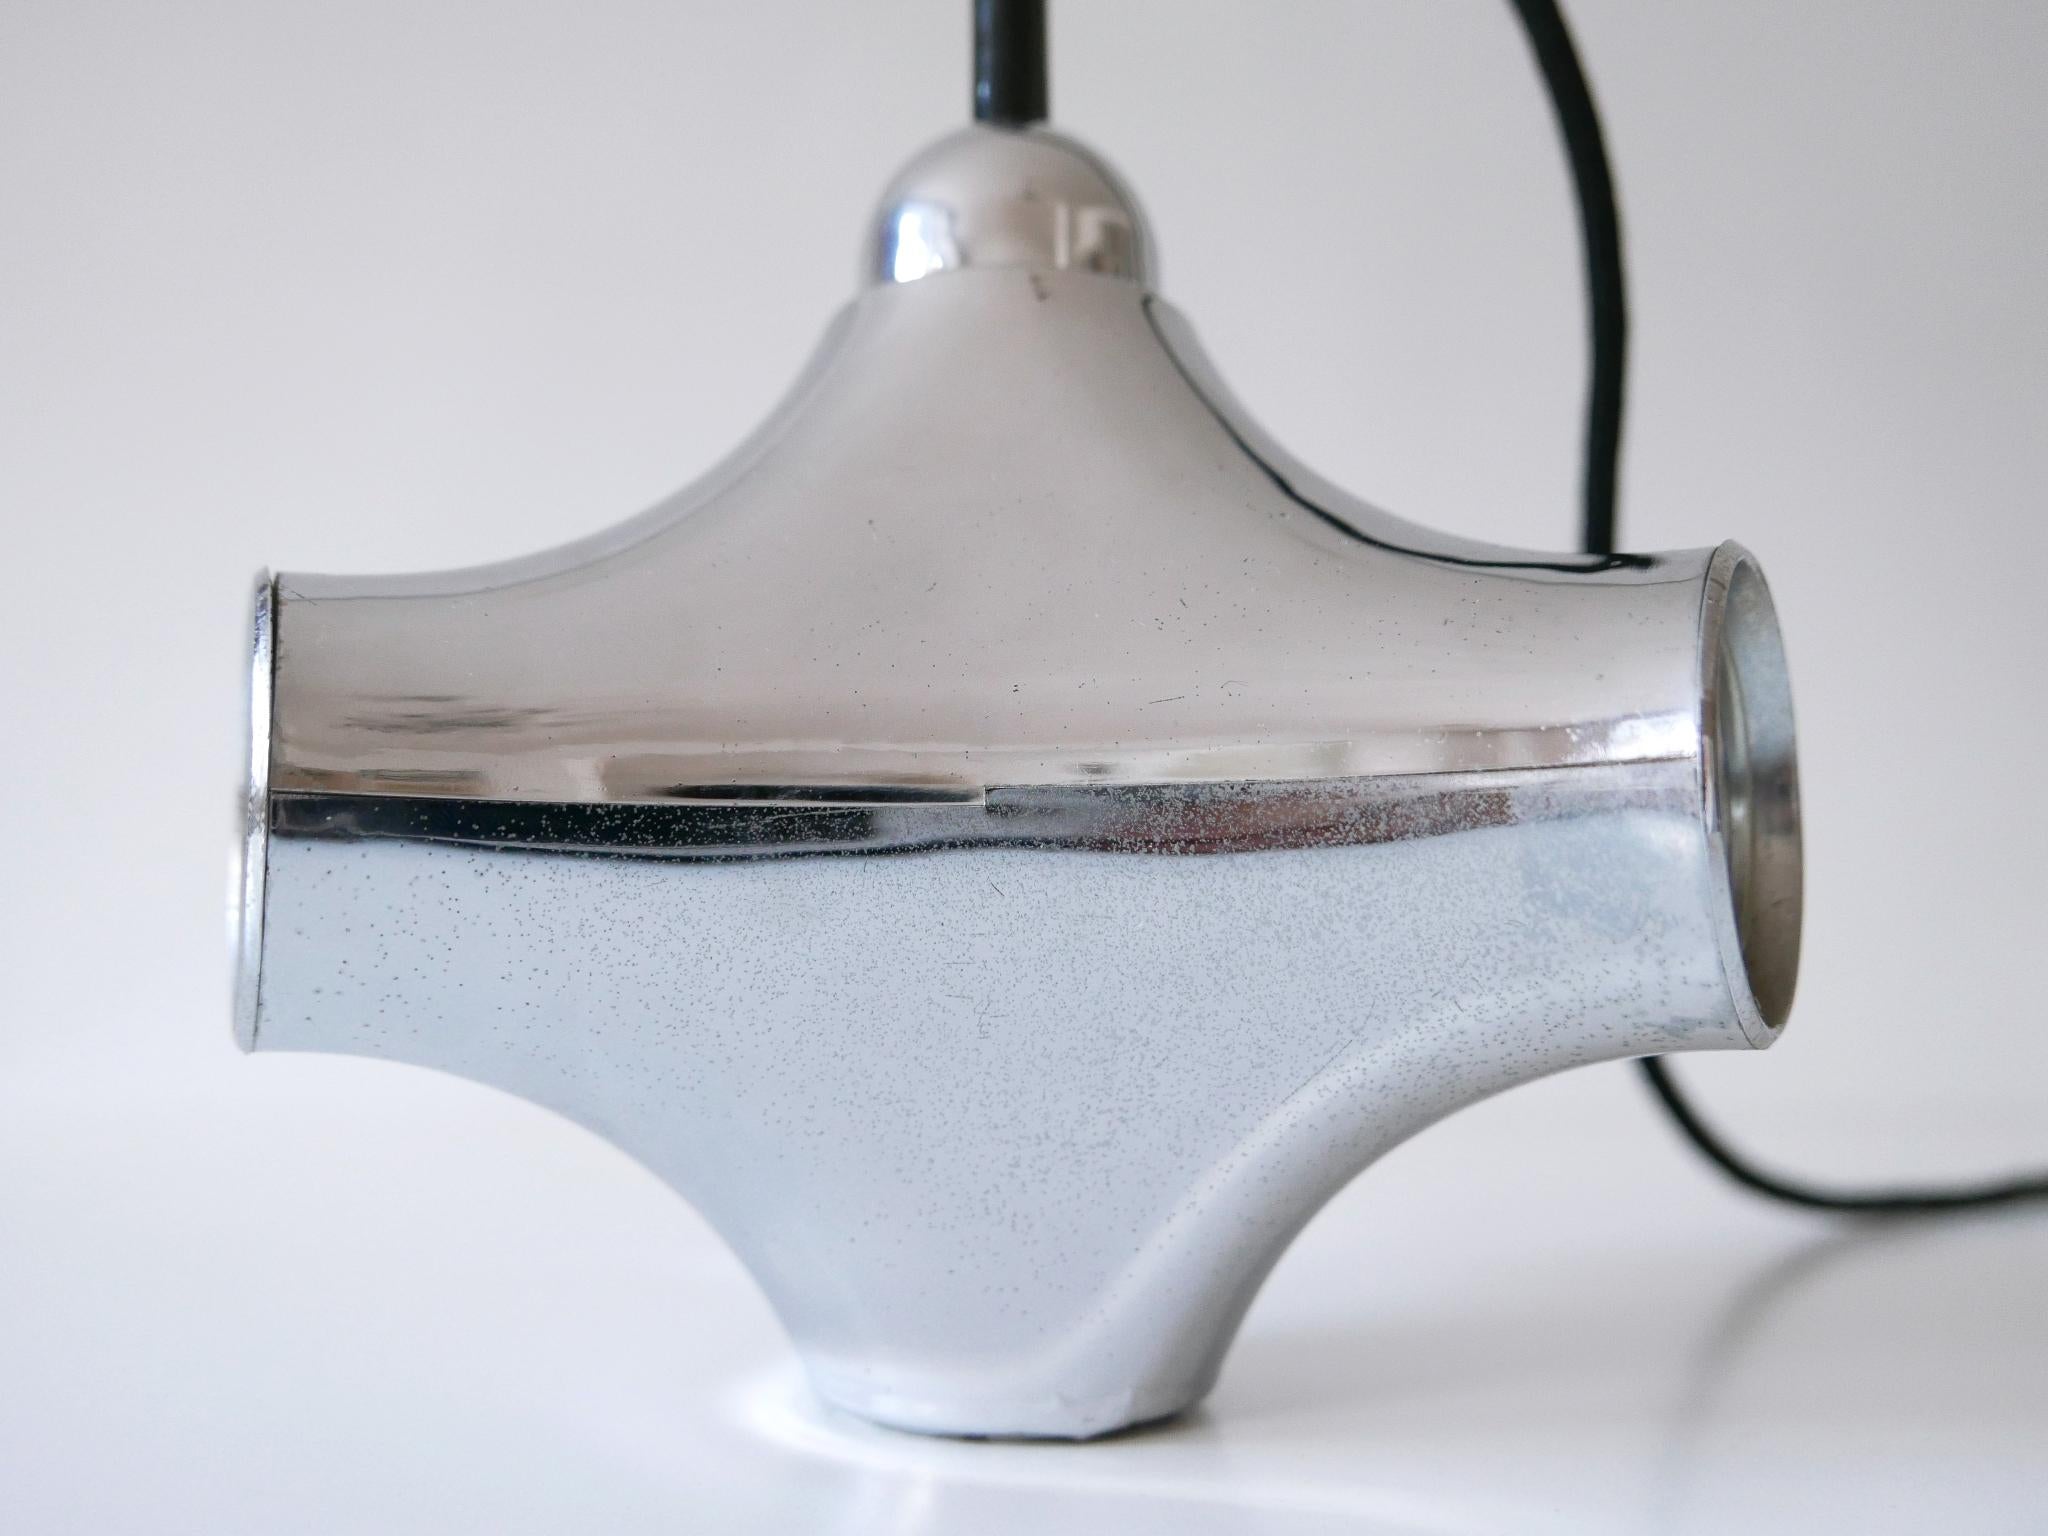 Rare Mid-Century Modern Atomic Pendant Lamp by Gebrüder Cosack Germany 1970s For Sale 11